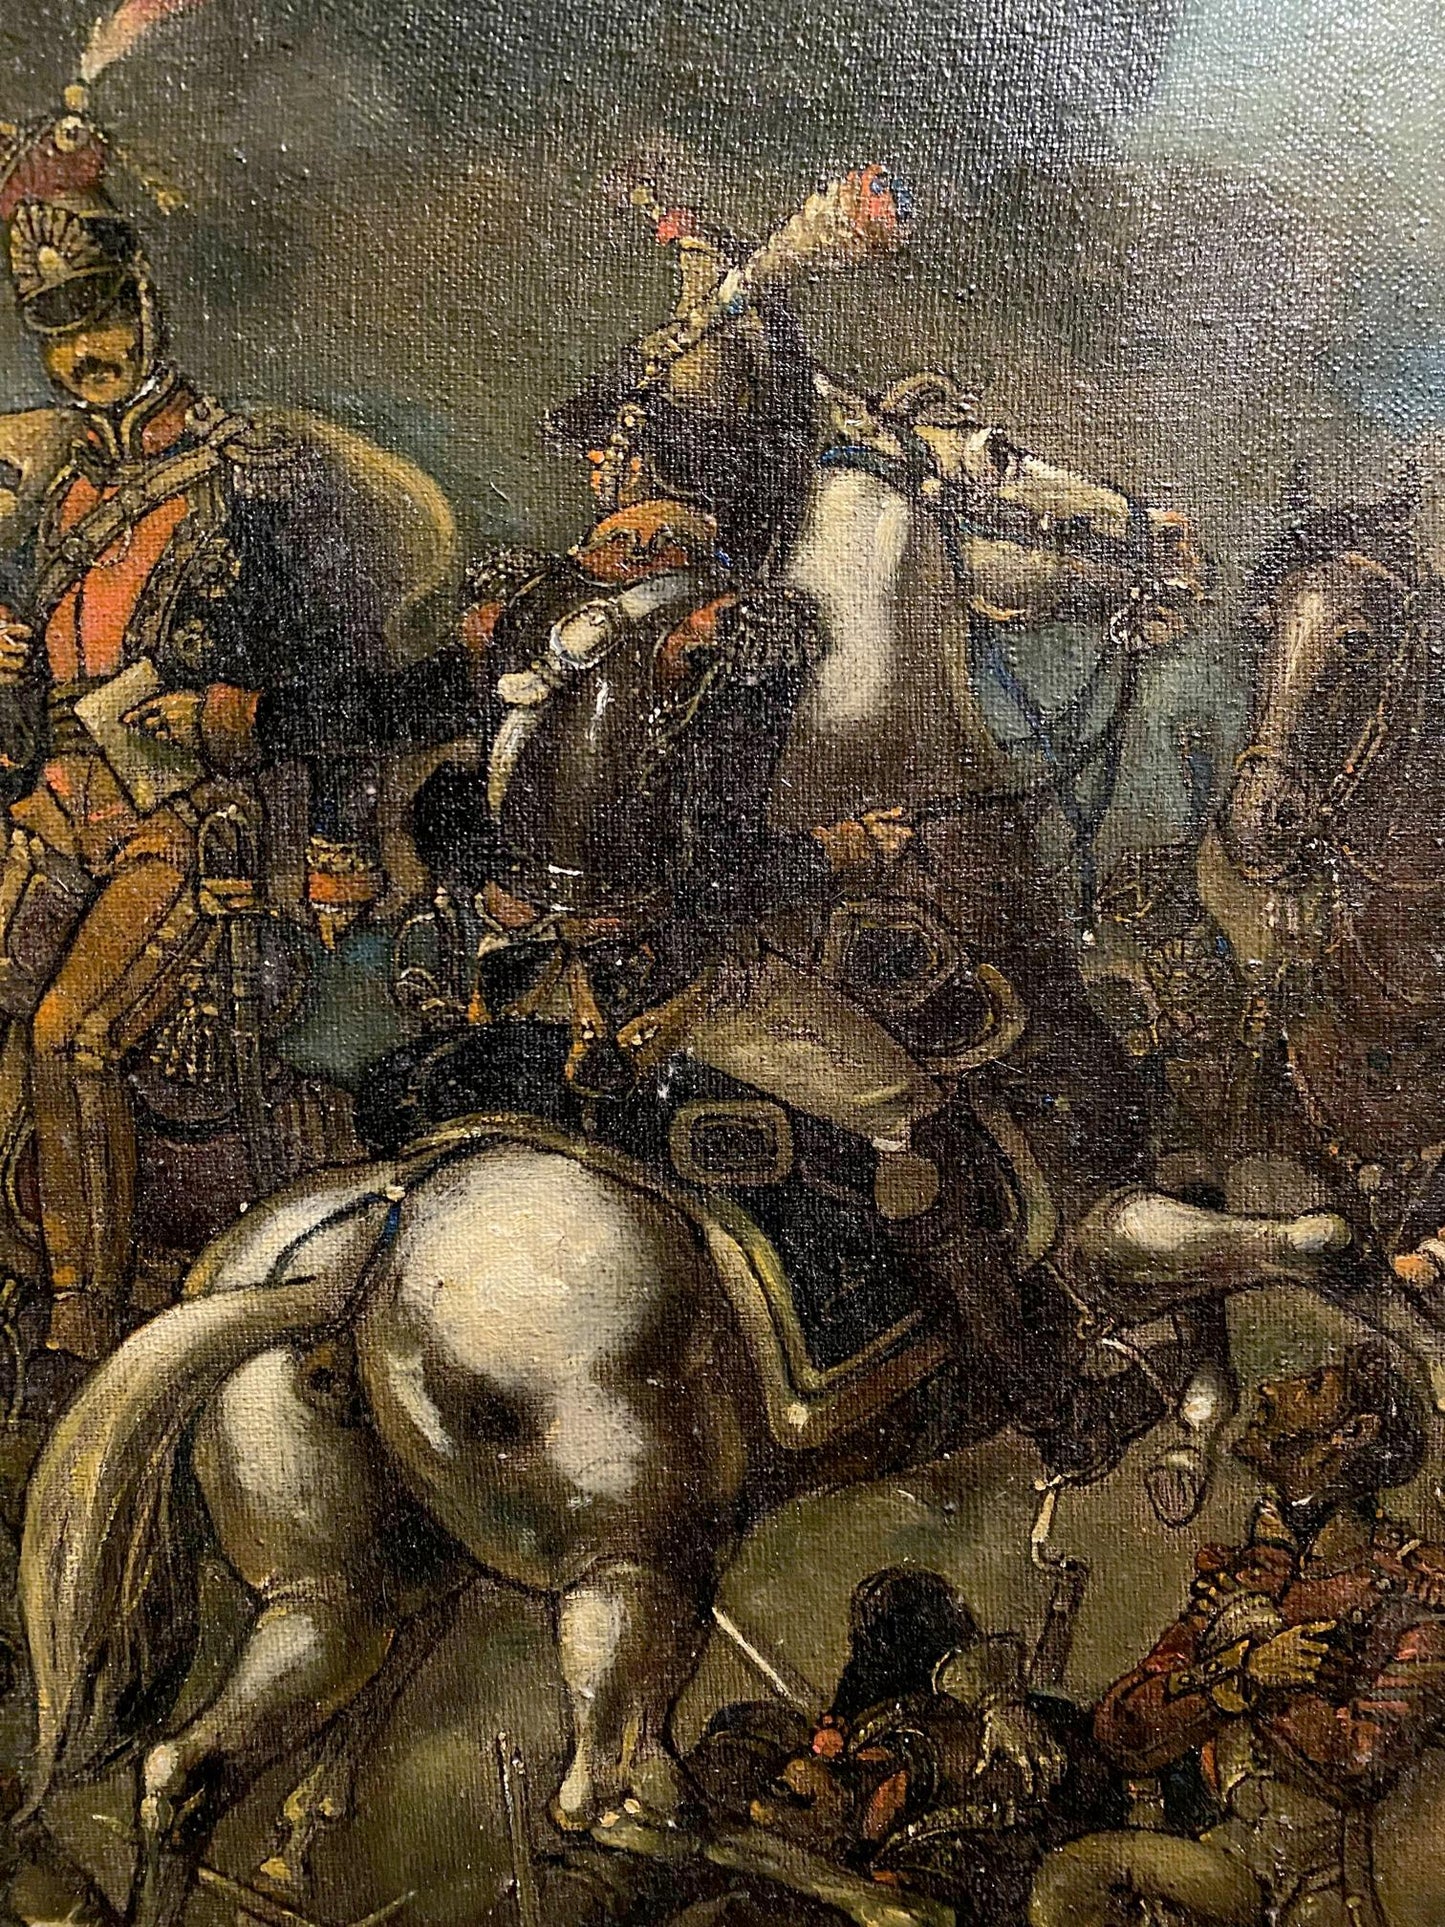 Napoleon and his army are depicted in an oil painting by Oleg Litvinov